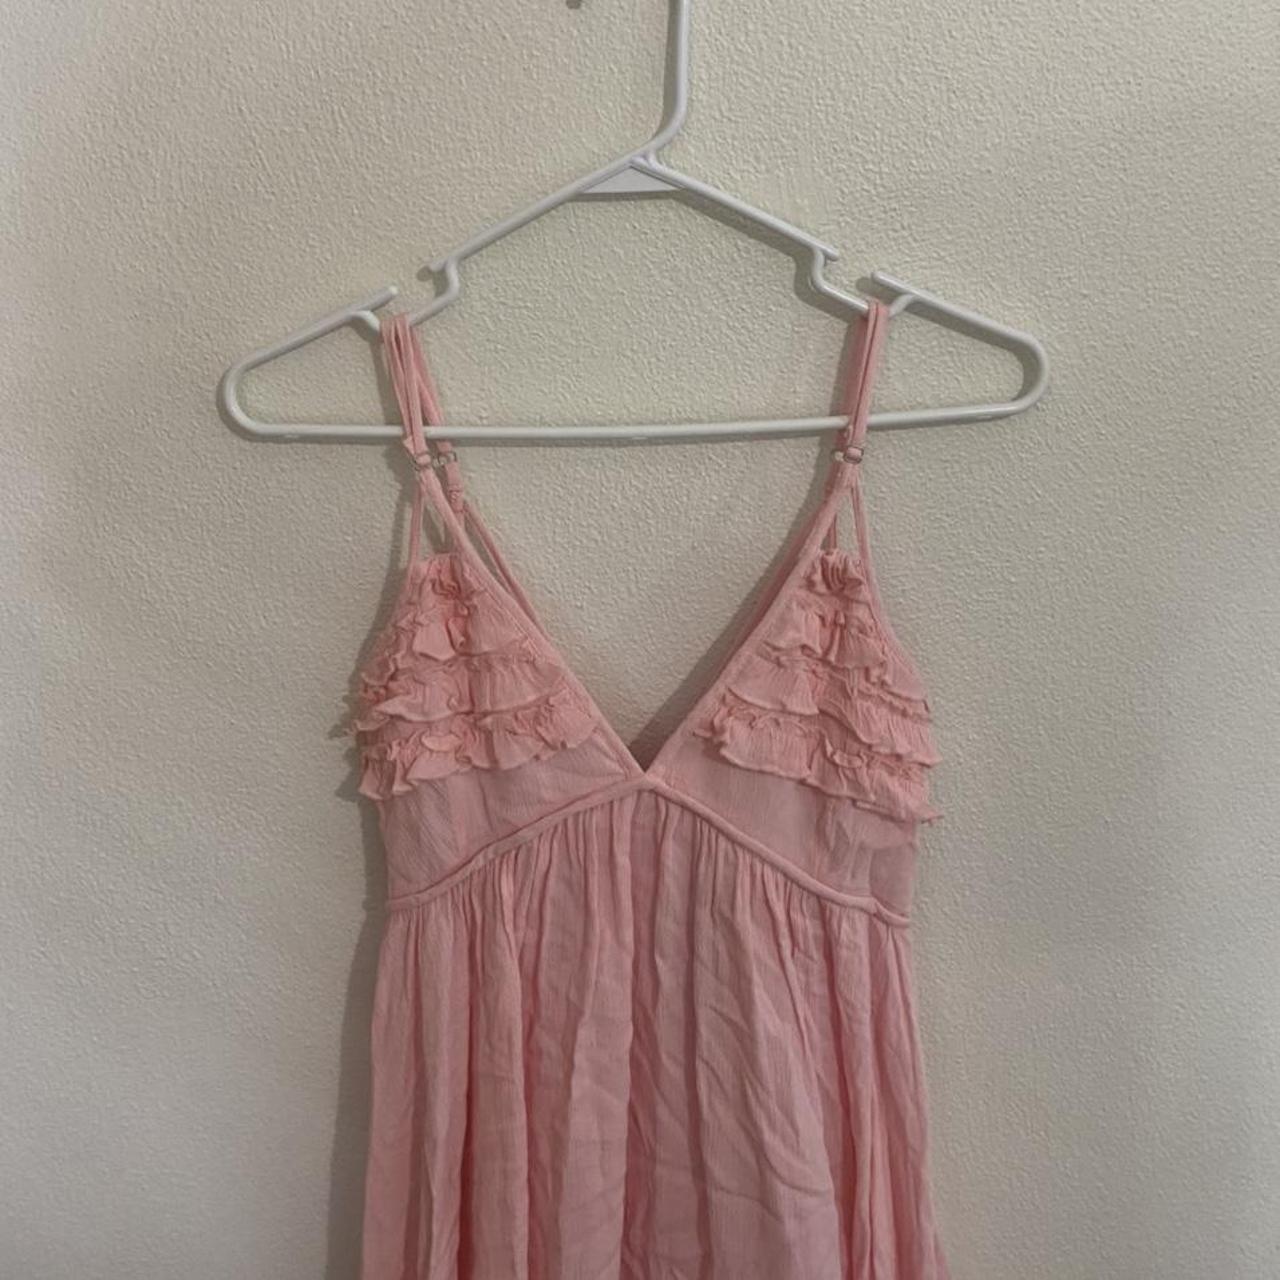 Product Image 2 - Apricot lame dress. Cute vacation